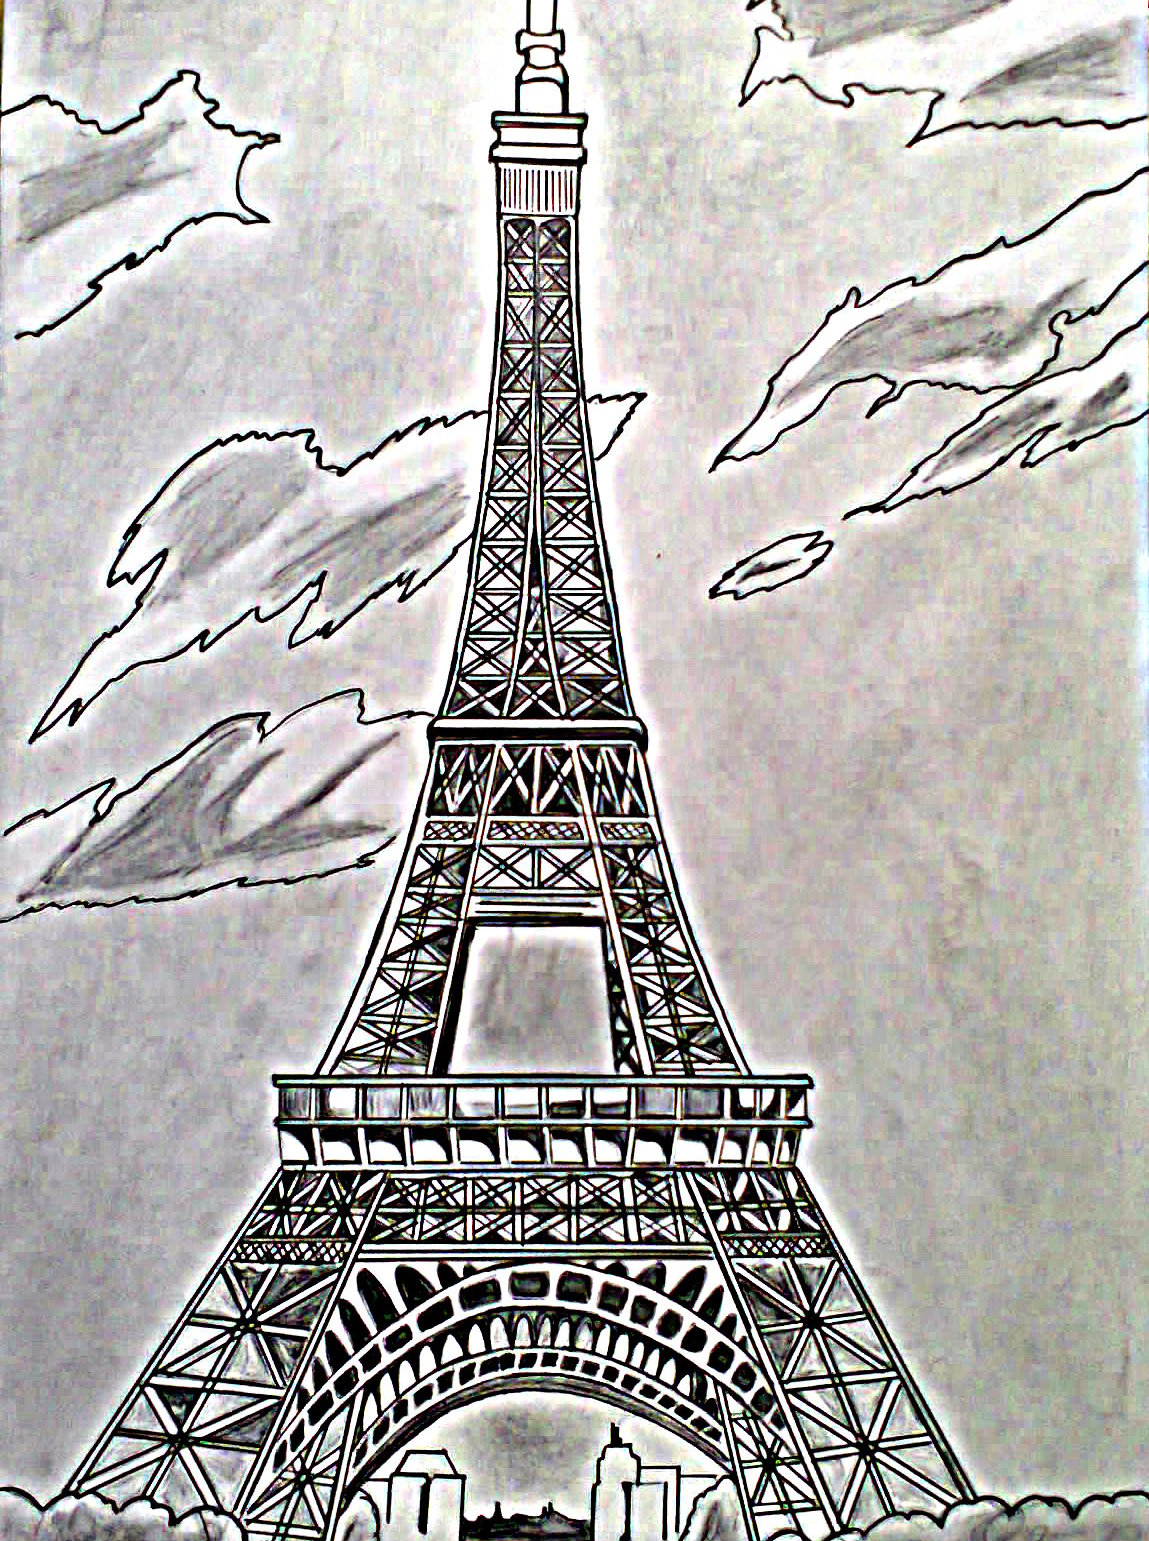 This art was inspired by Eiffel Tower